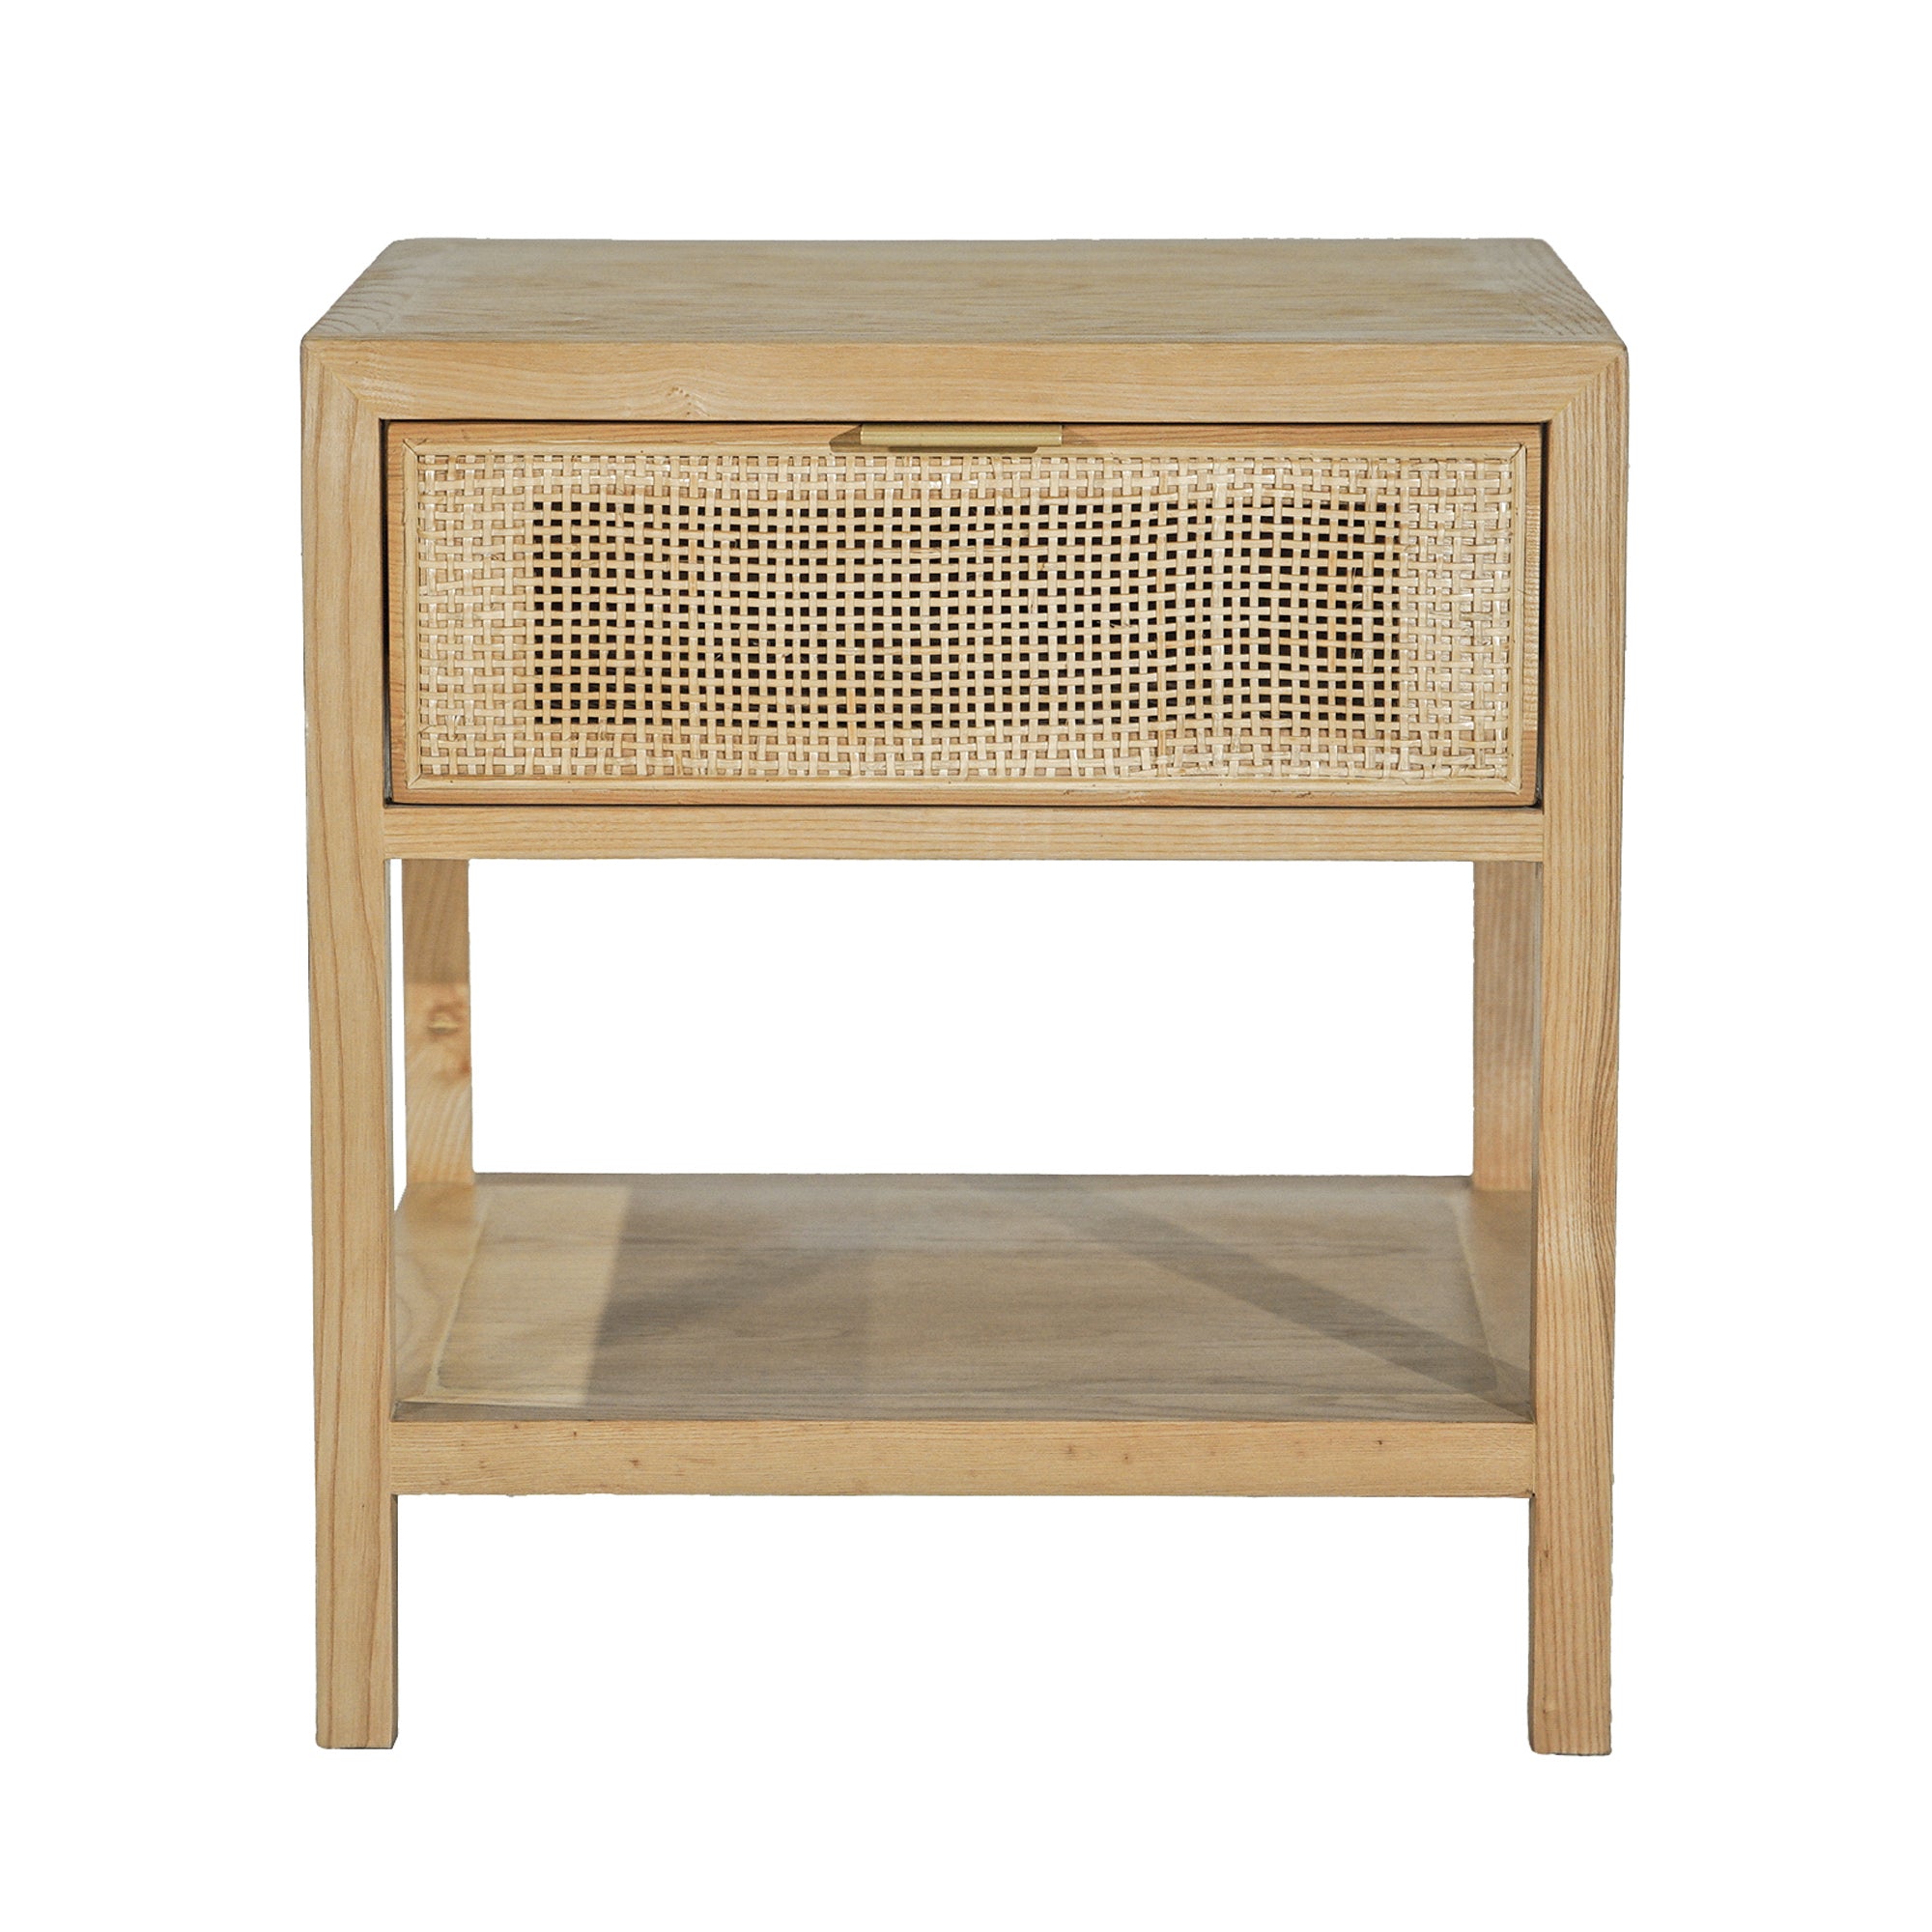 LH Imports, Rattana Side Table